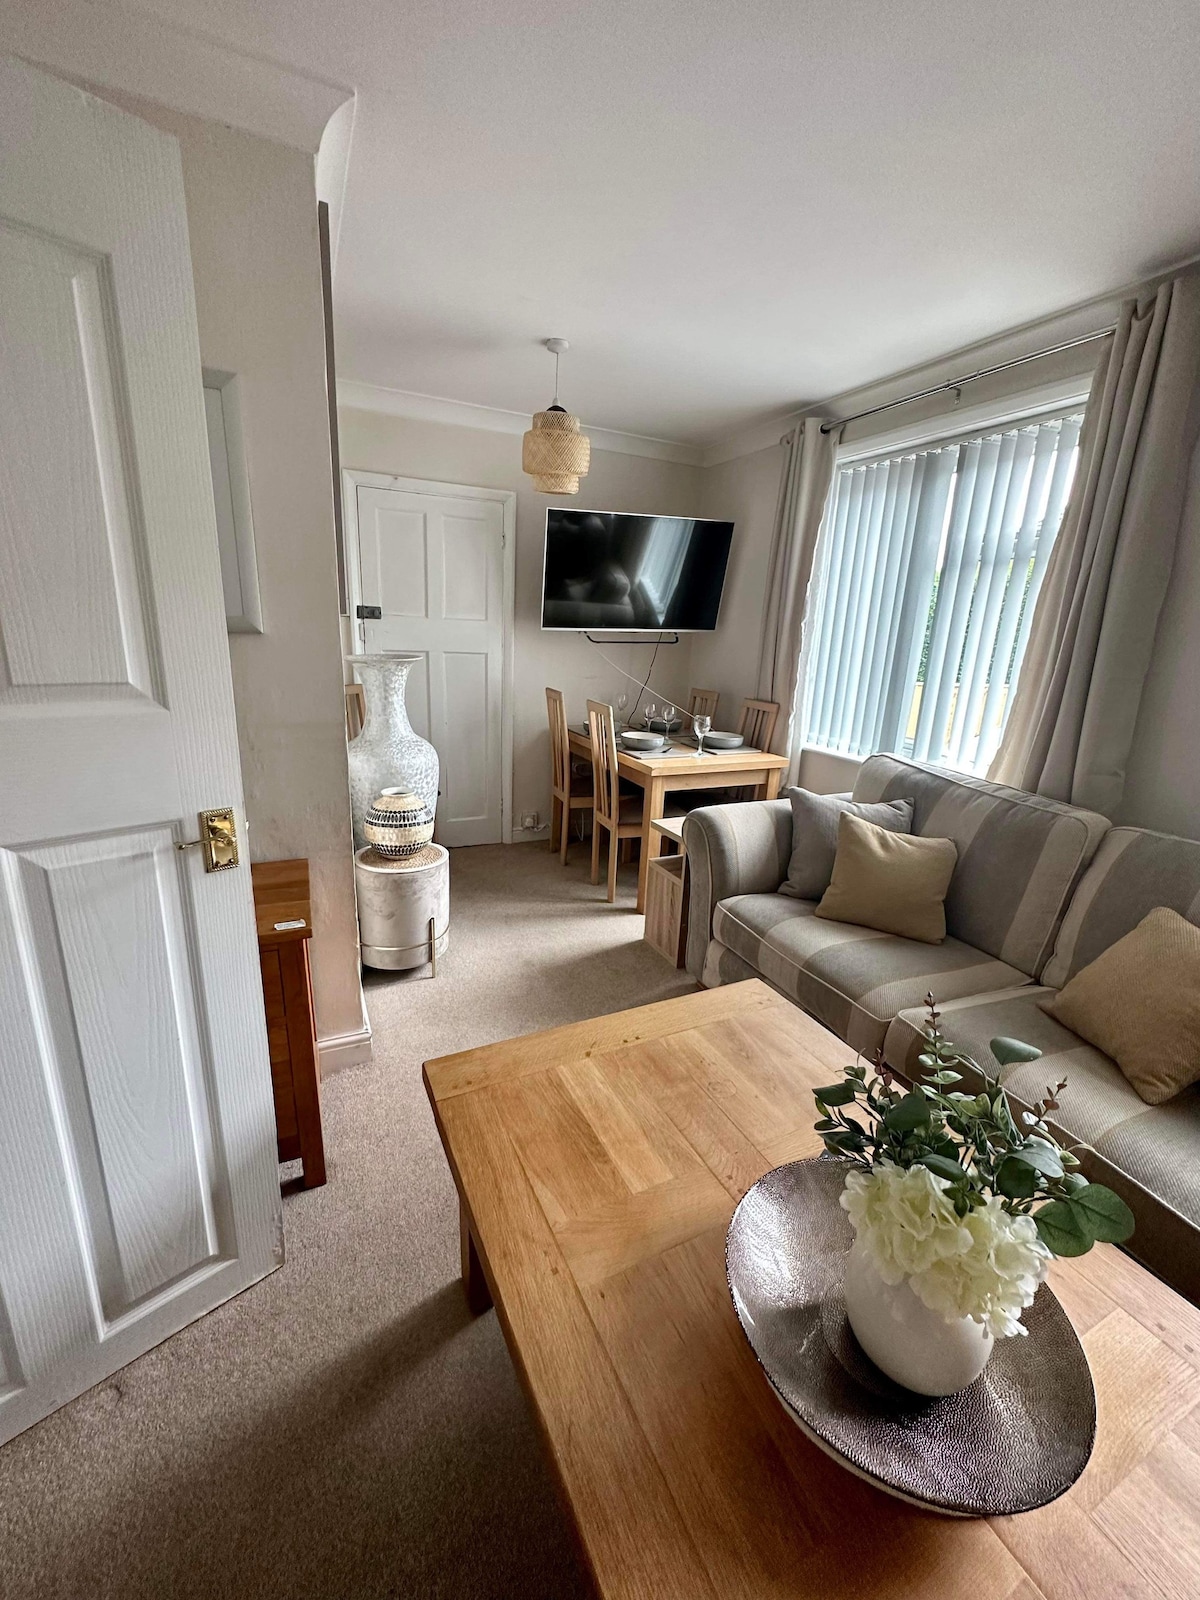 Lovely 2 bed apartment sleeps 5